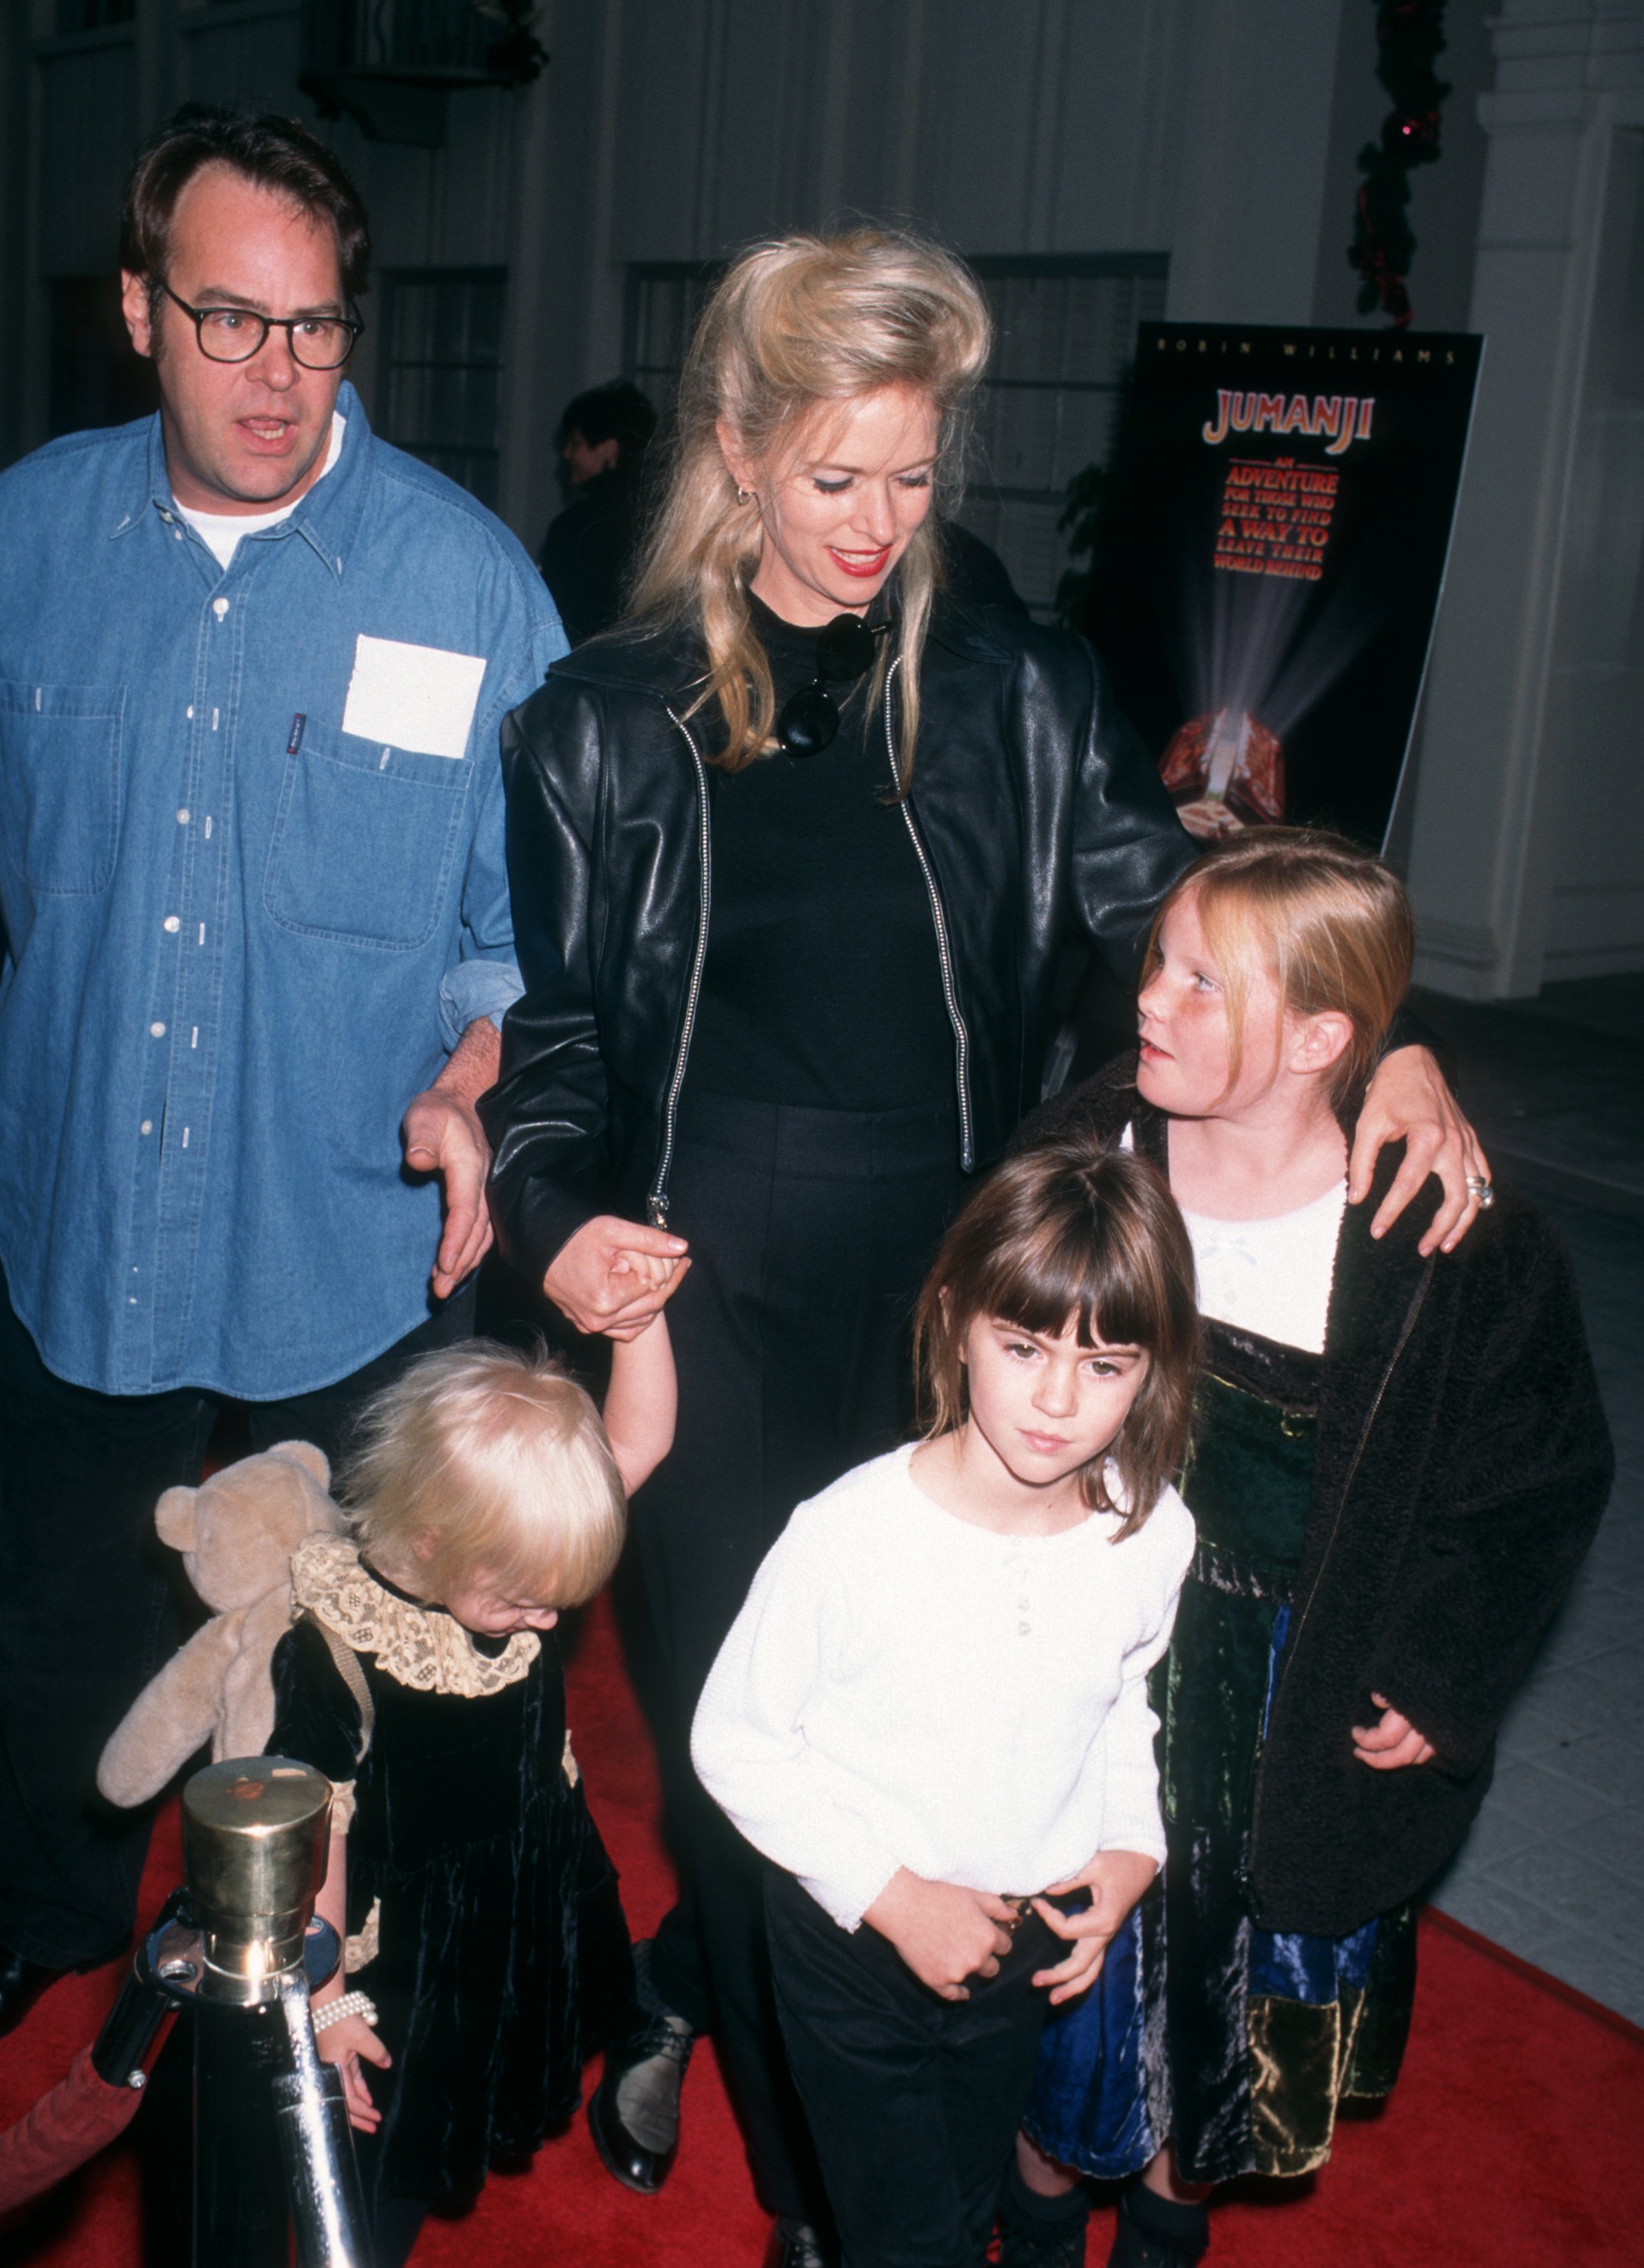 Actor Dan Aykroyd, actress Donna Dixon and daughters Danielle Aykroyd and Belle Aykroyd attend the world premiere of 'Jumanji' on December 10, 1995 at Sony Studios in Culver City, California. | Source: Getty Images